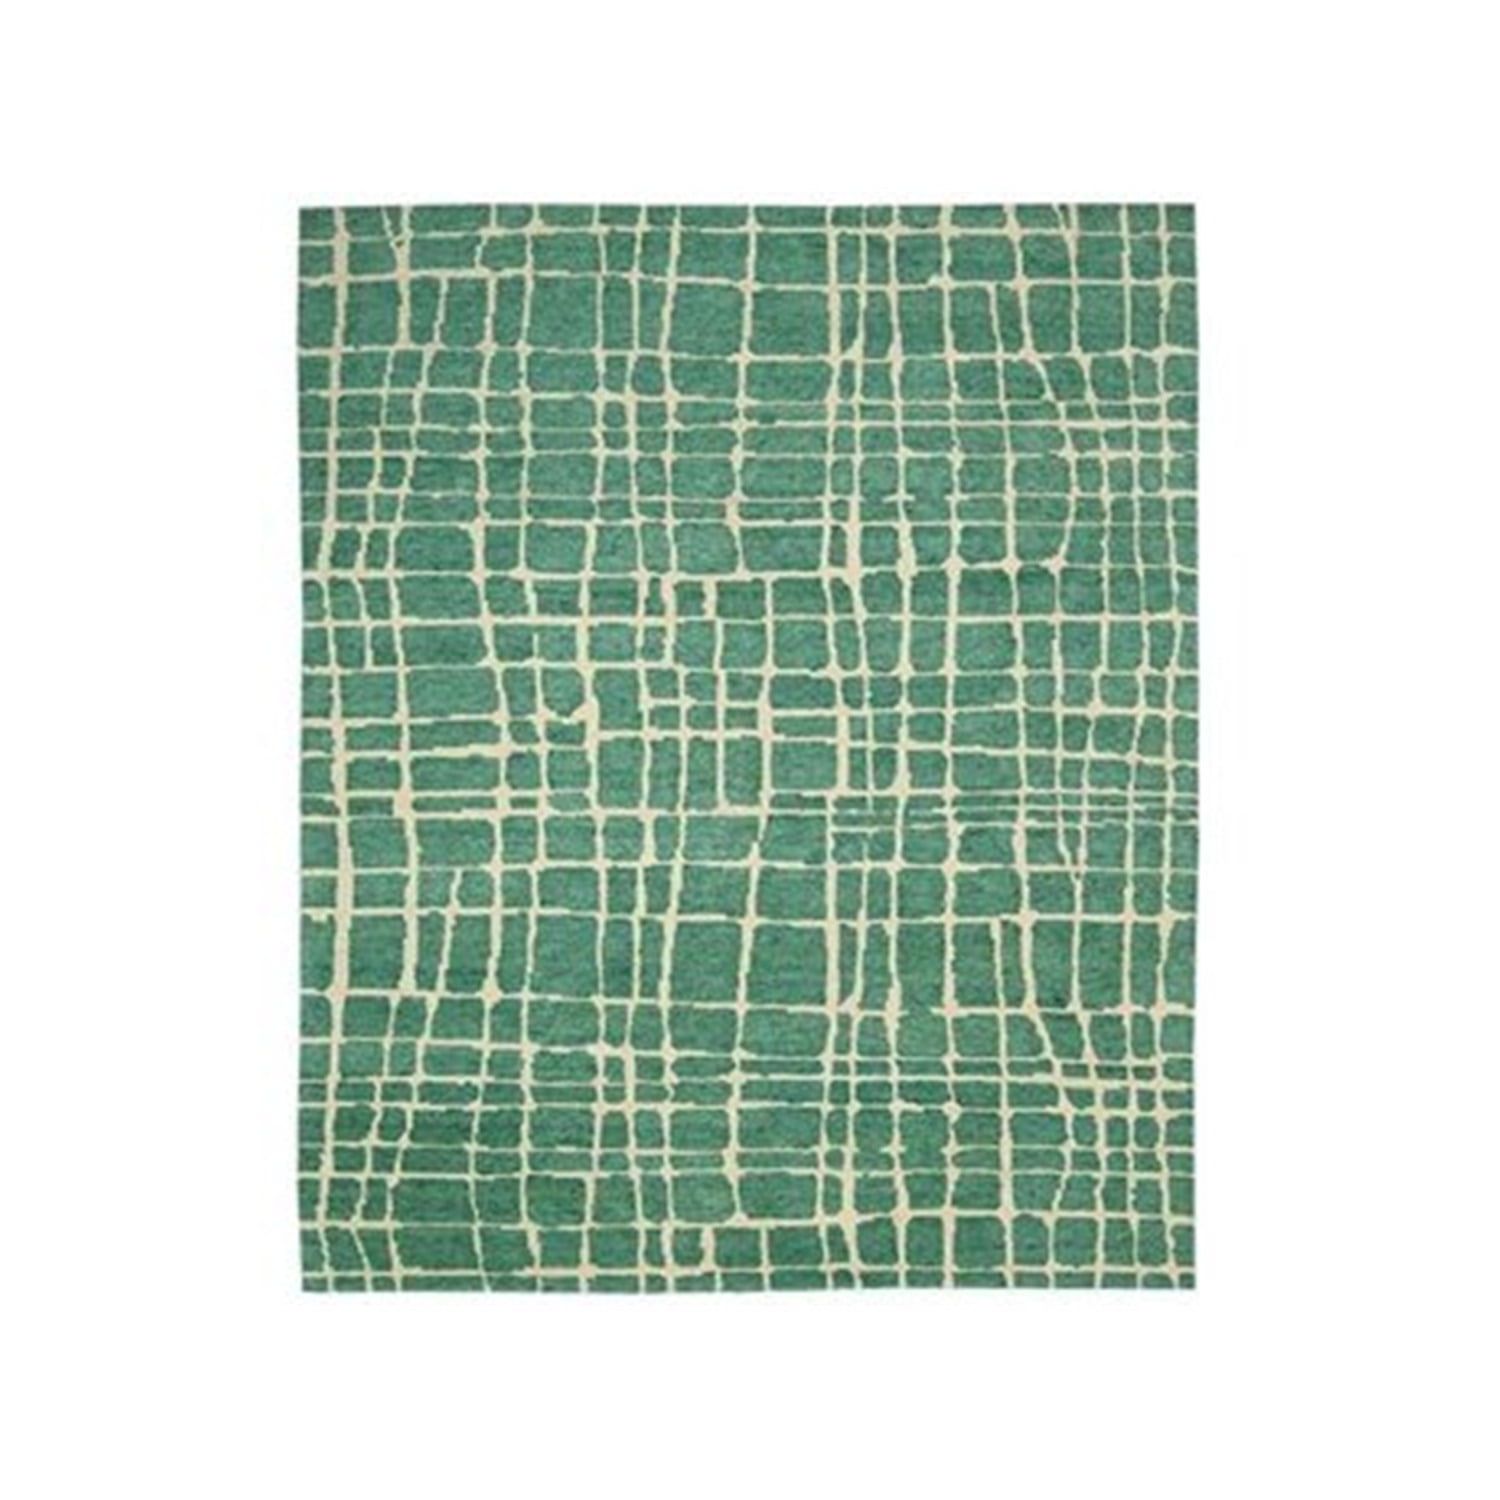 Turquoise Green Hand-Knotted Wool Abstract 7'9" x 9'9" Area Rug